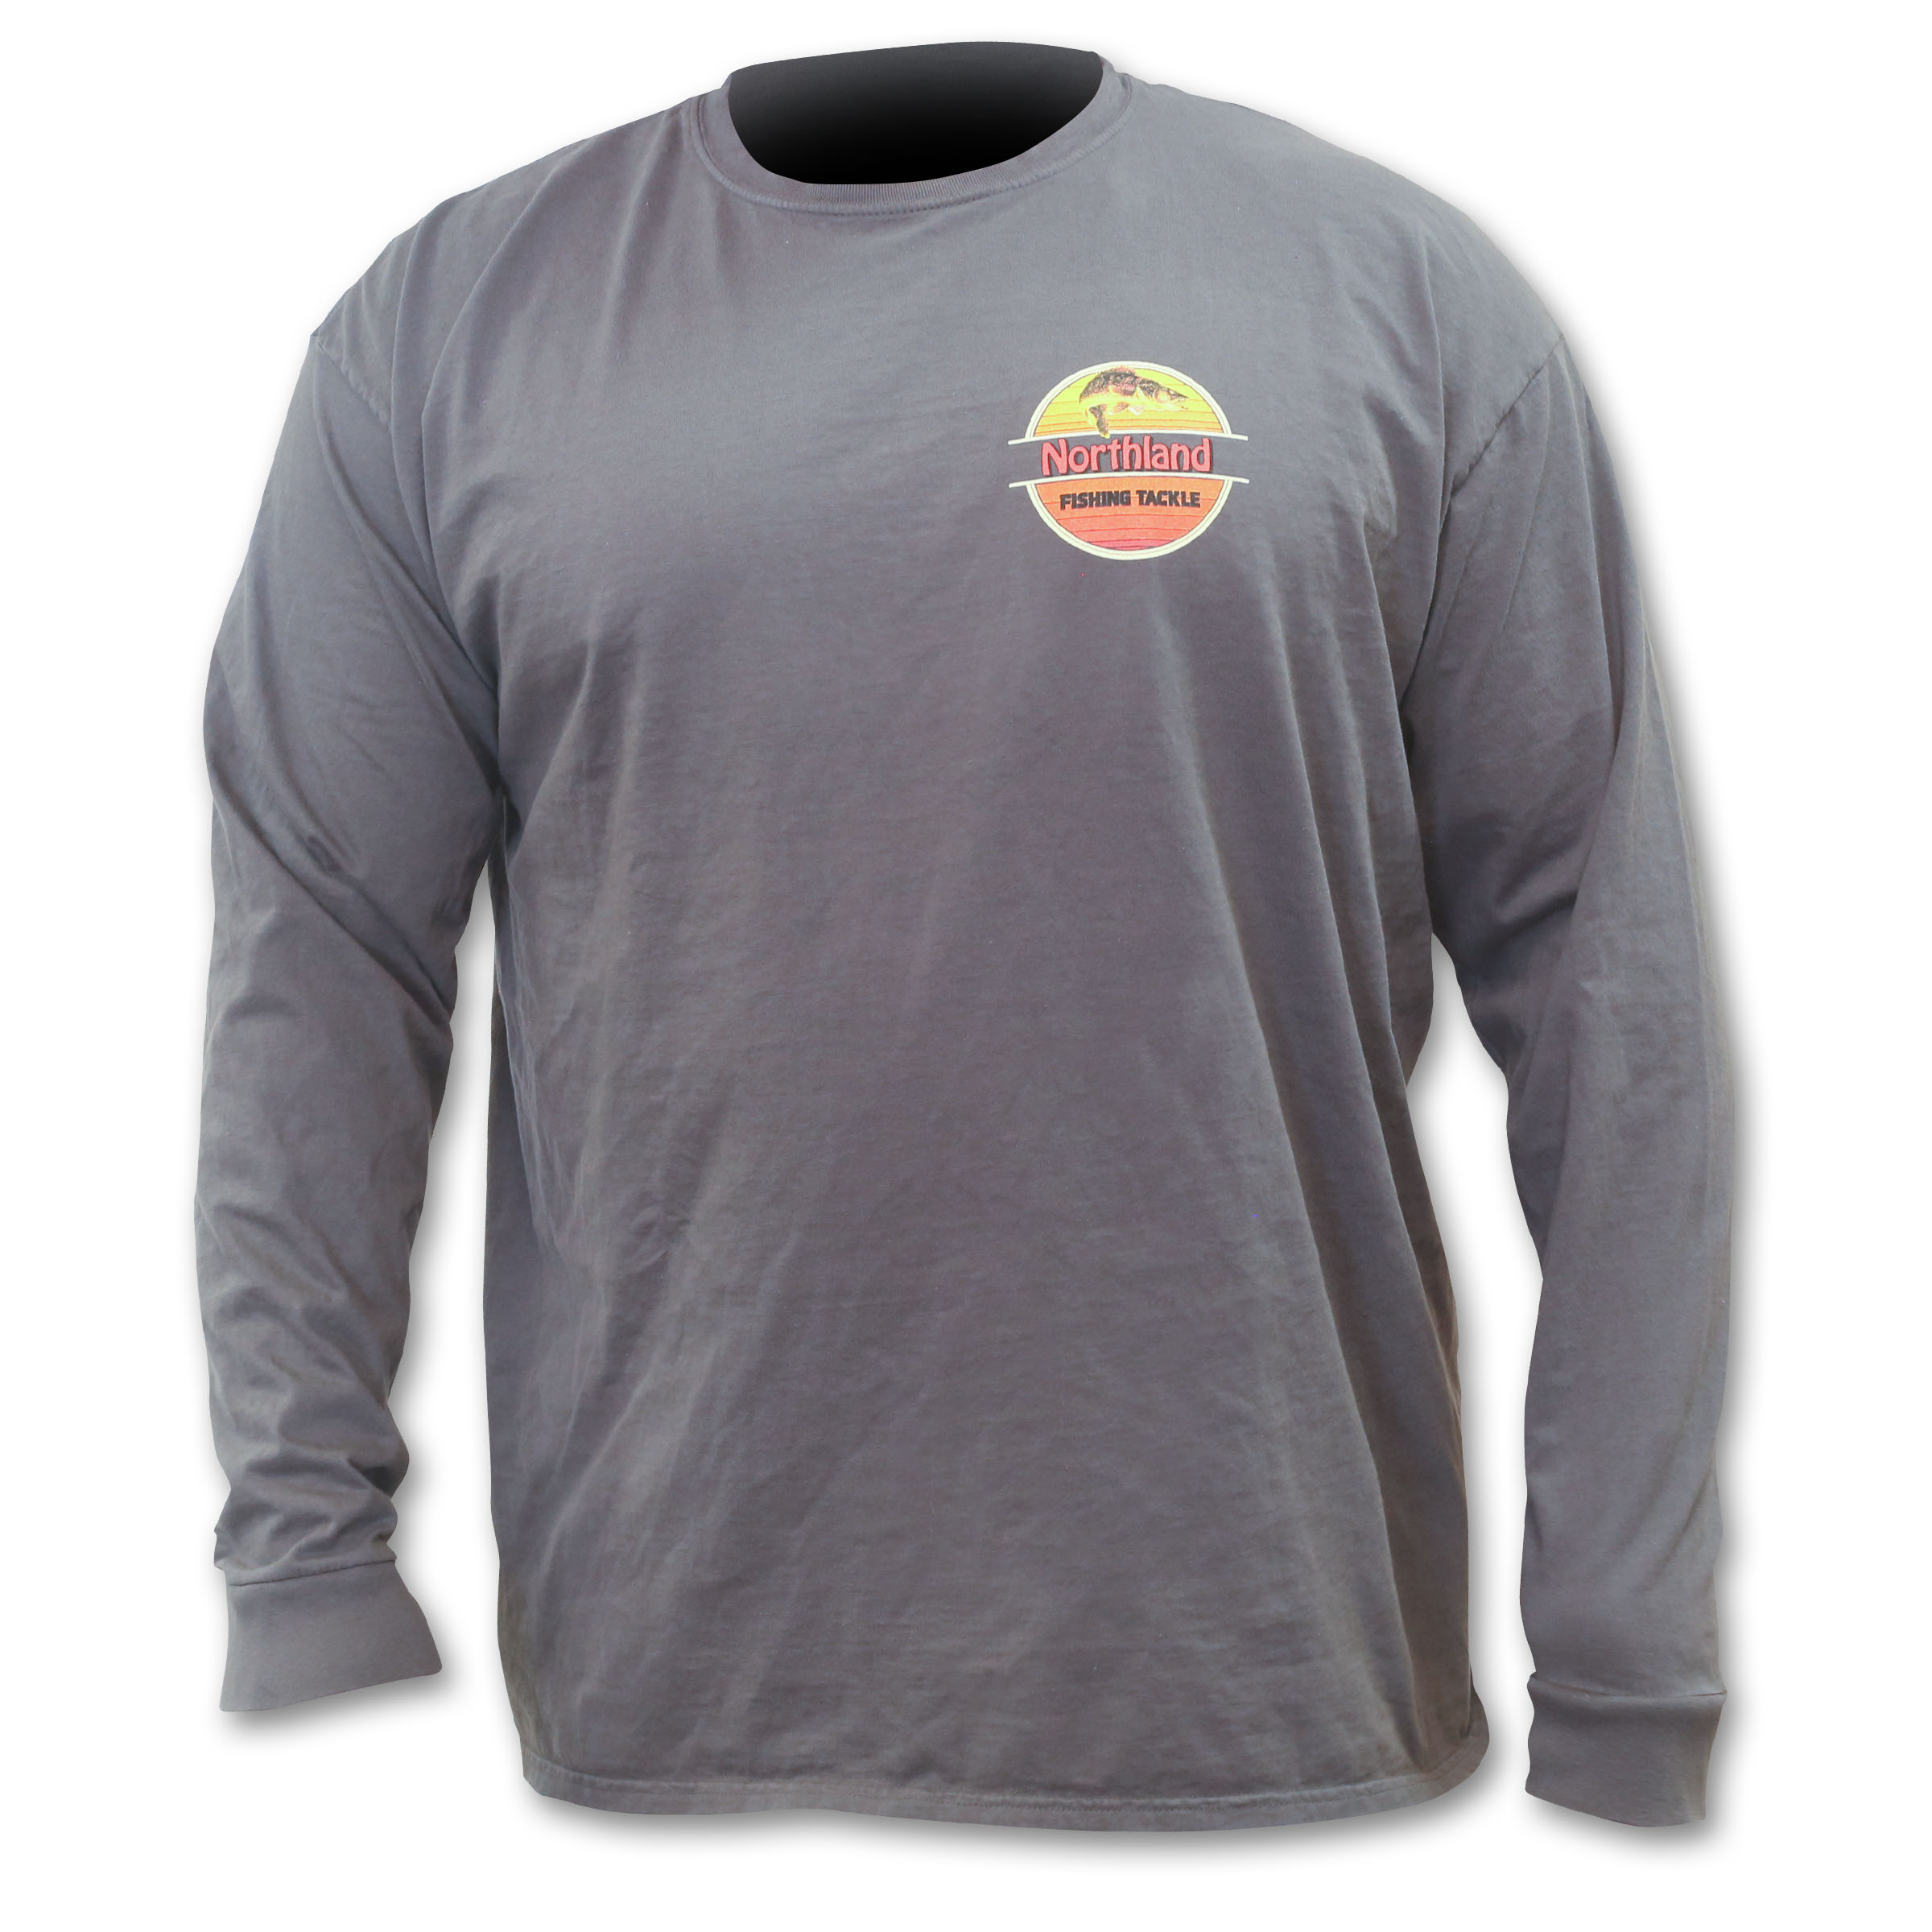 Northland Walleye Long Sleeve T-Shirt in Coal color.